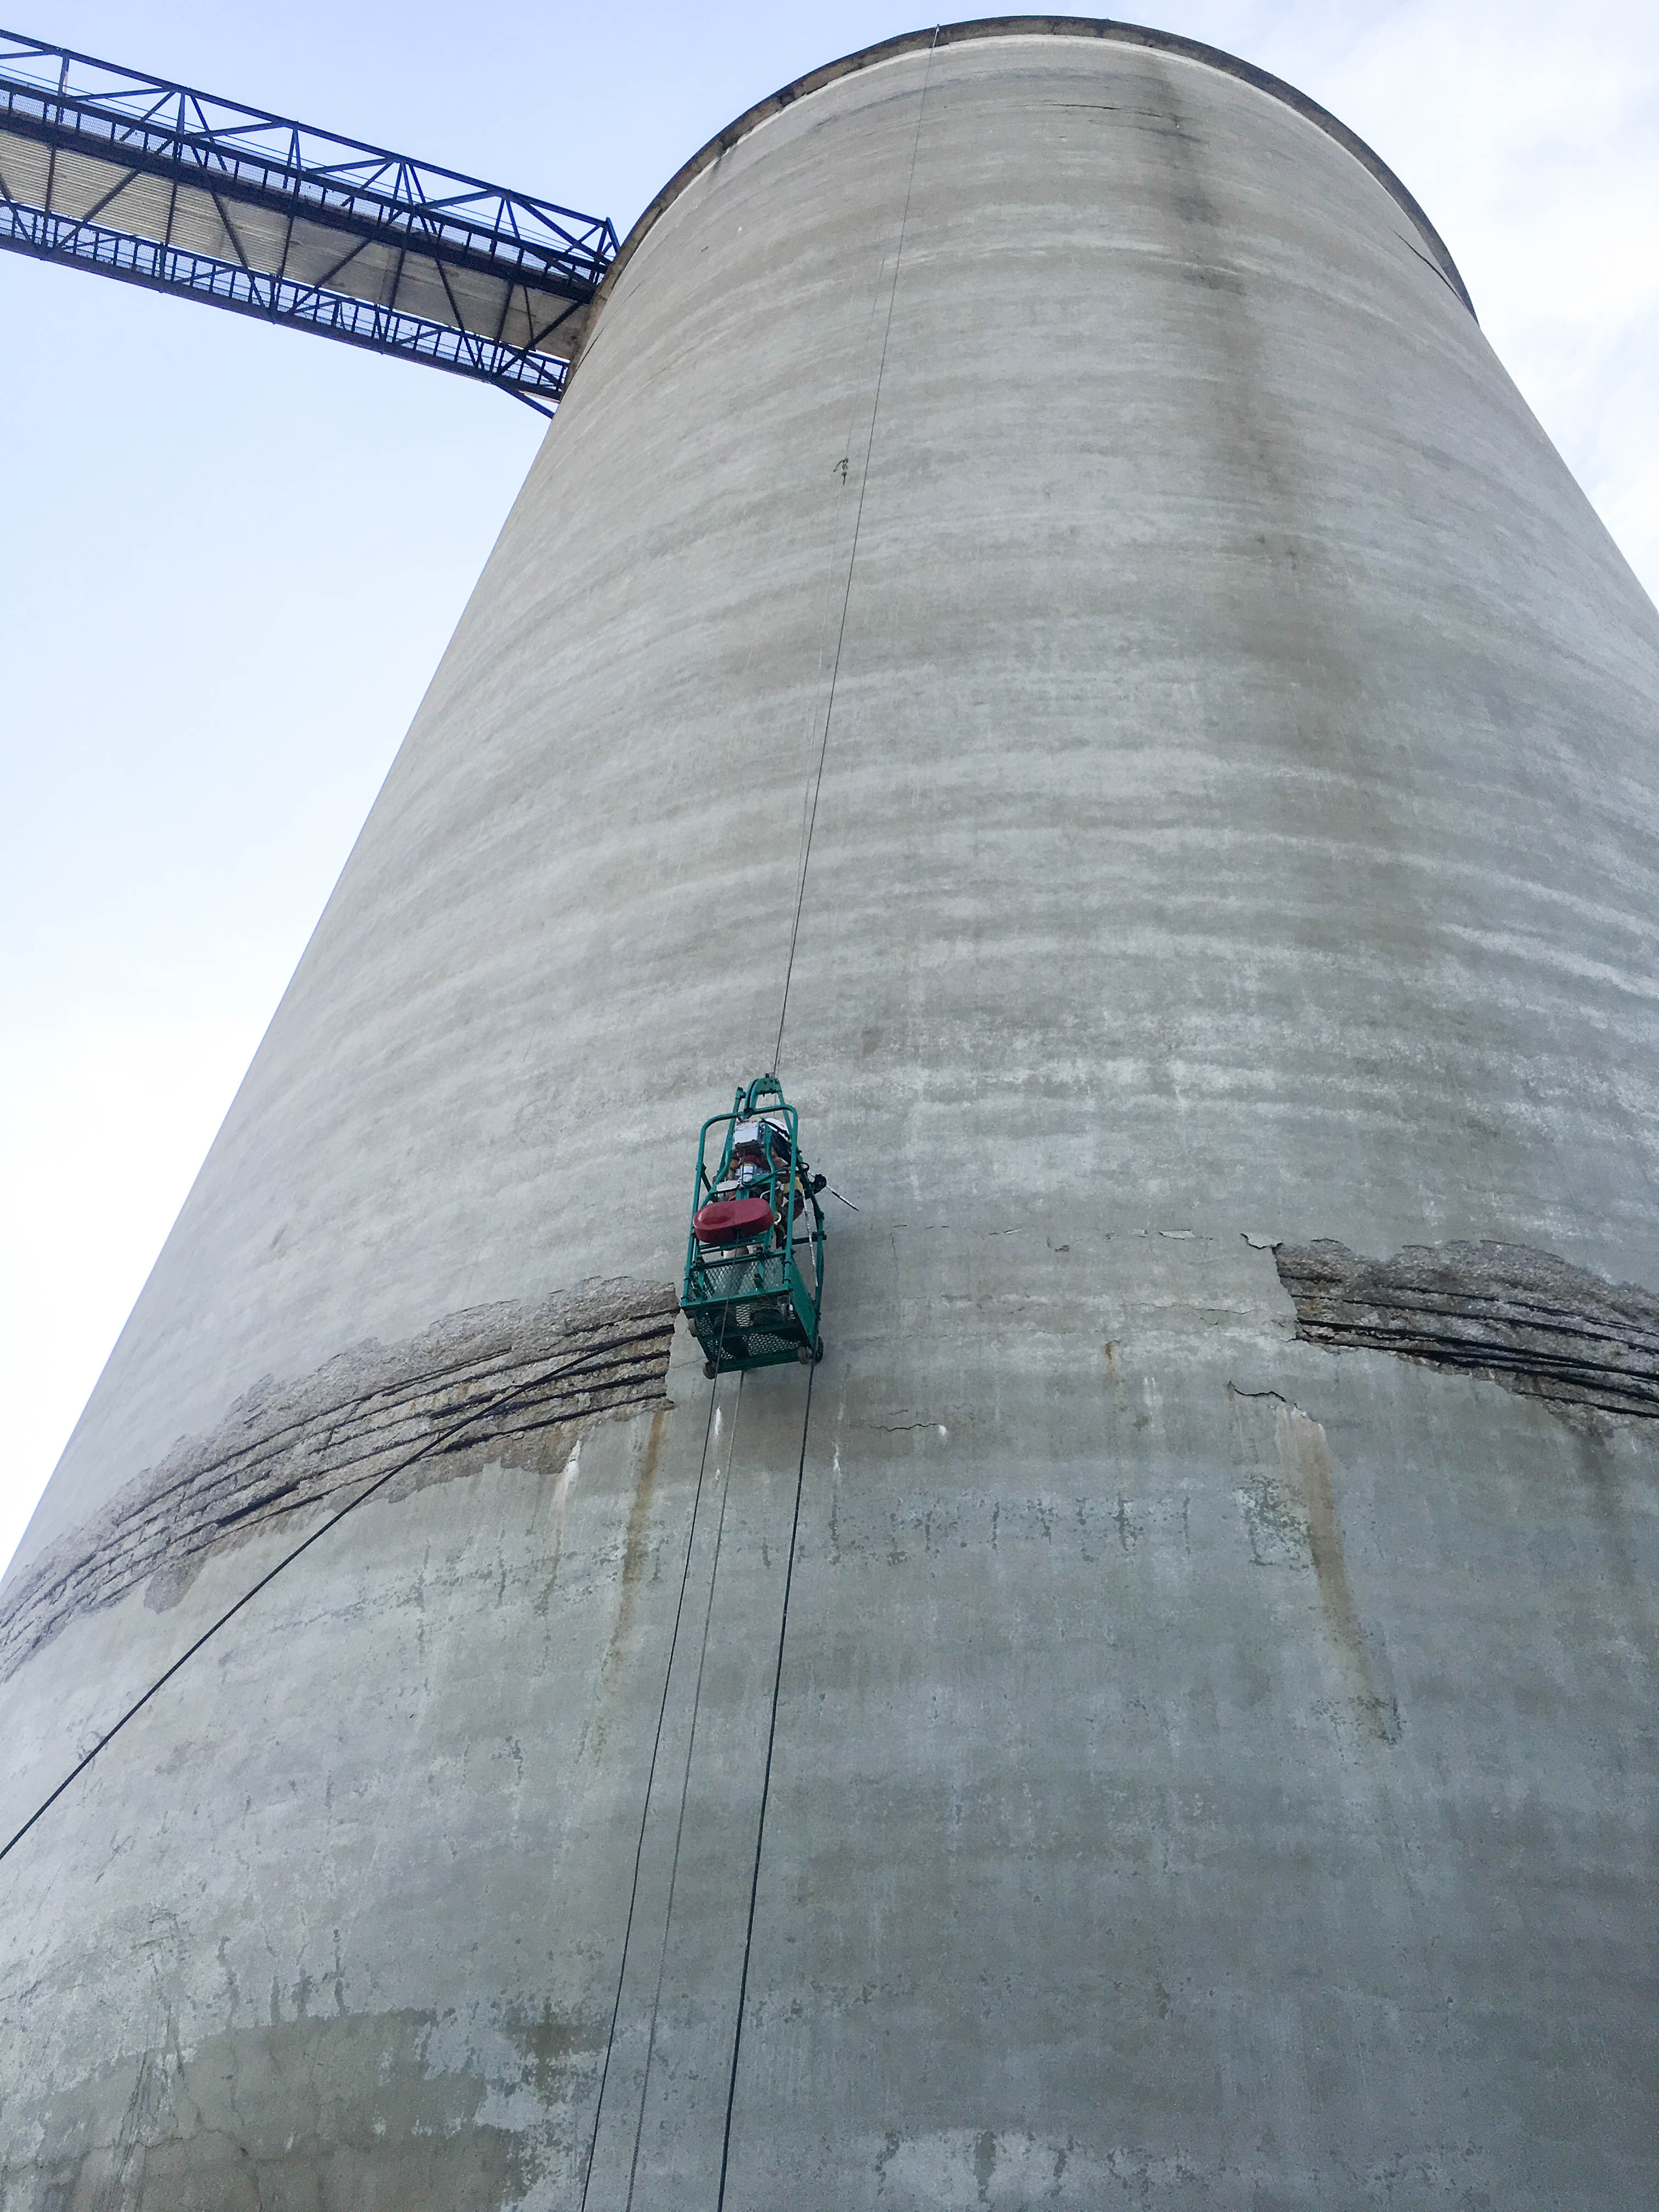 Man on side of silo performing silo inspection